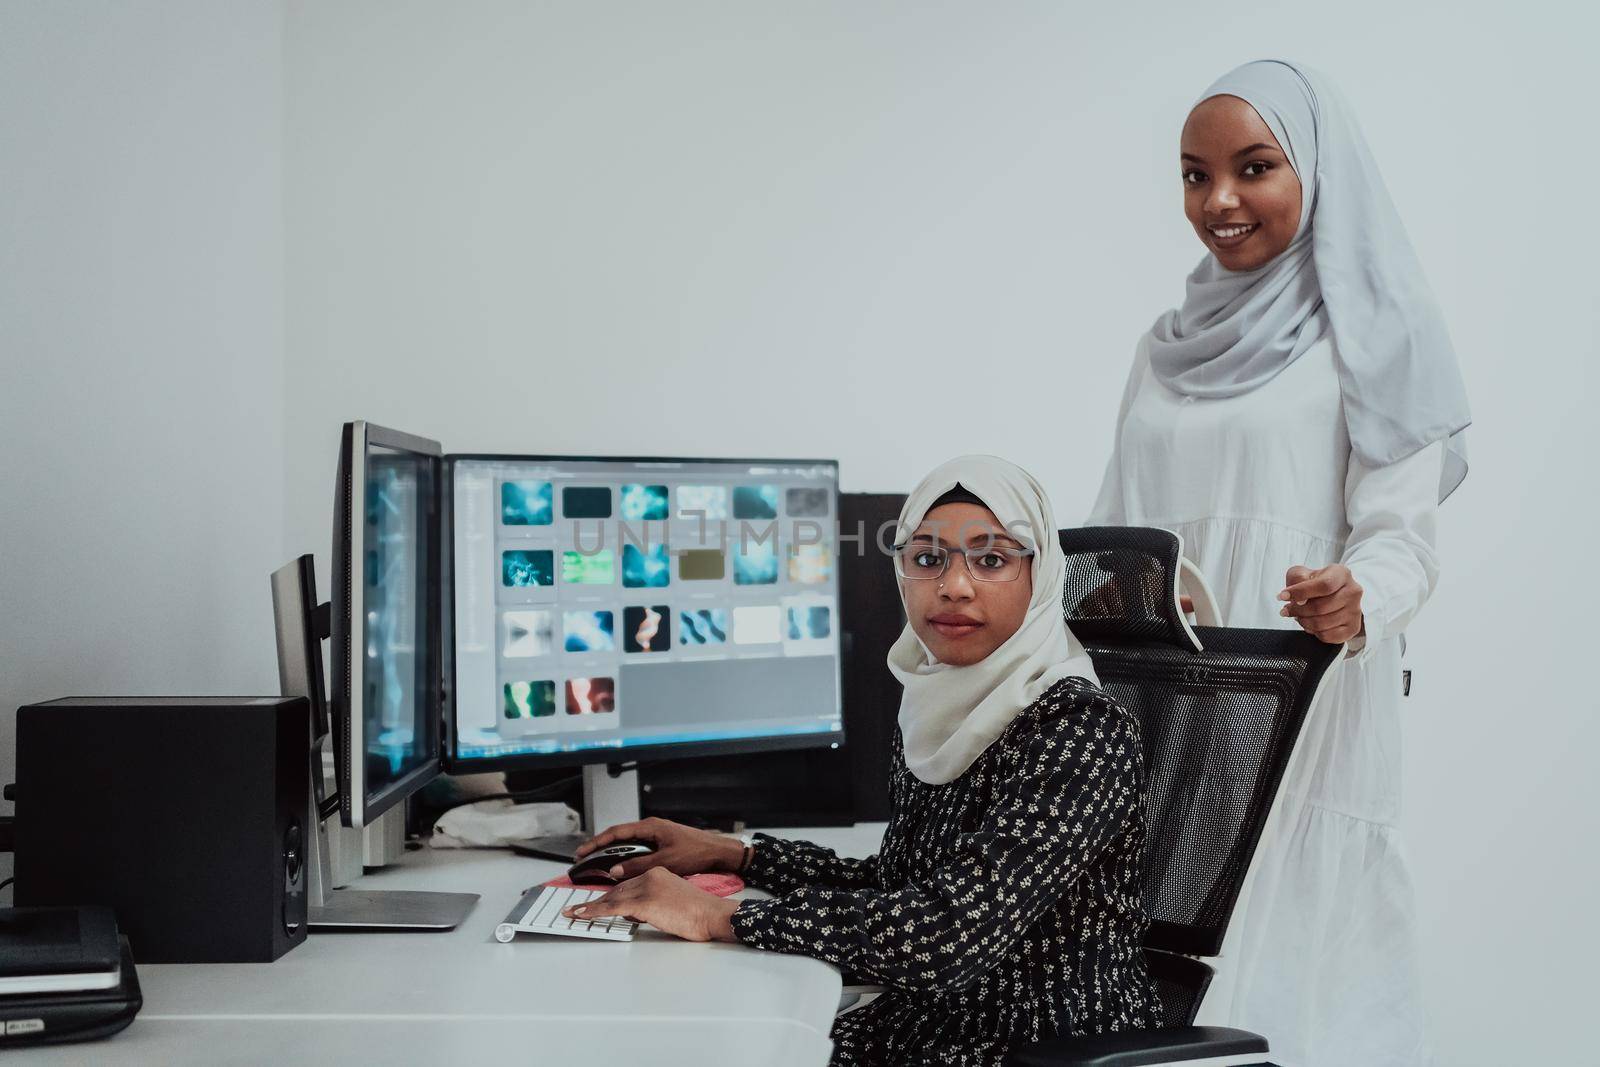 Friends at the office are two young Afro-American modern Muslim businesswomen wearing scarfs in a creative bright office workplace with a big screen. High-quality photo